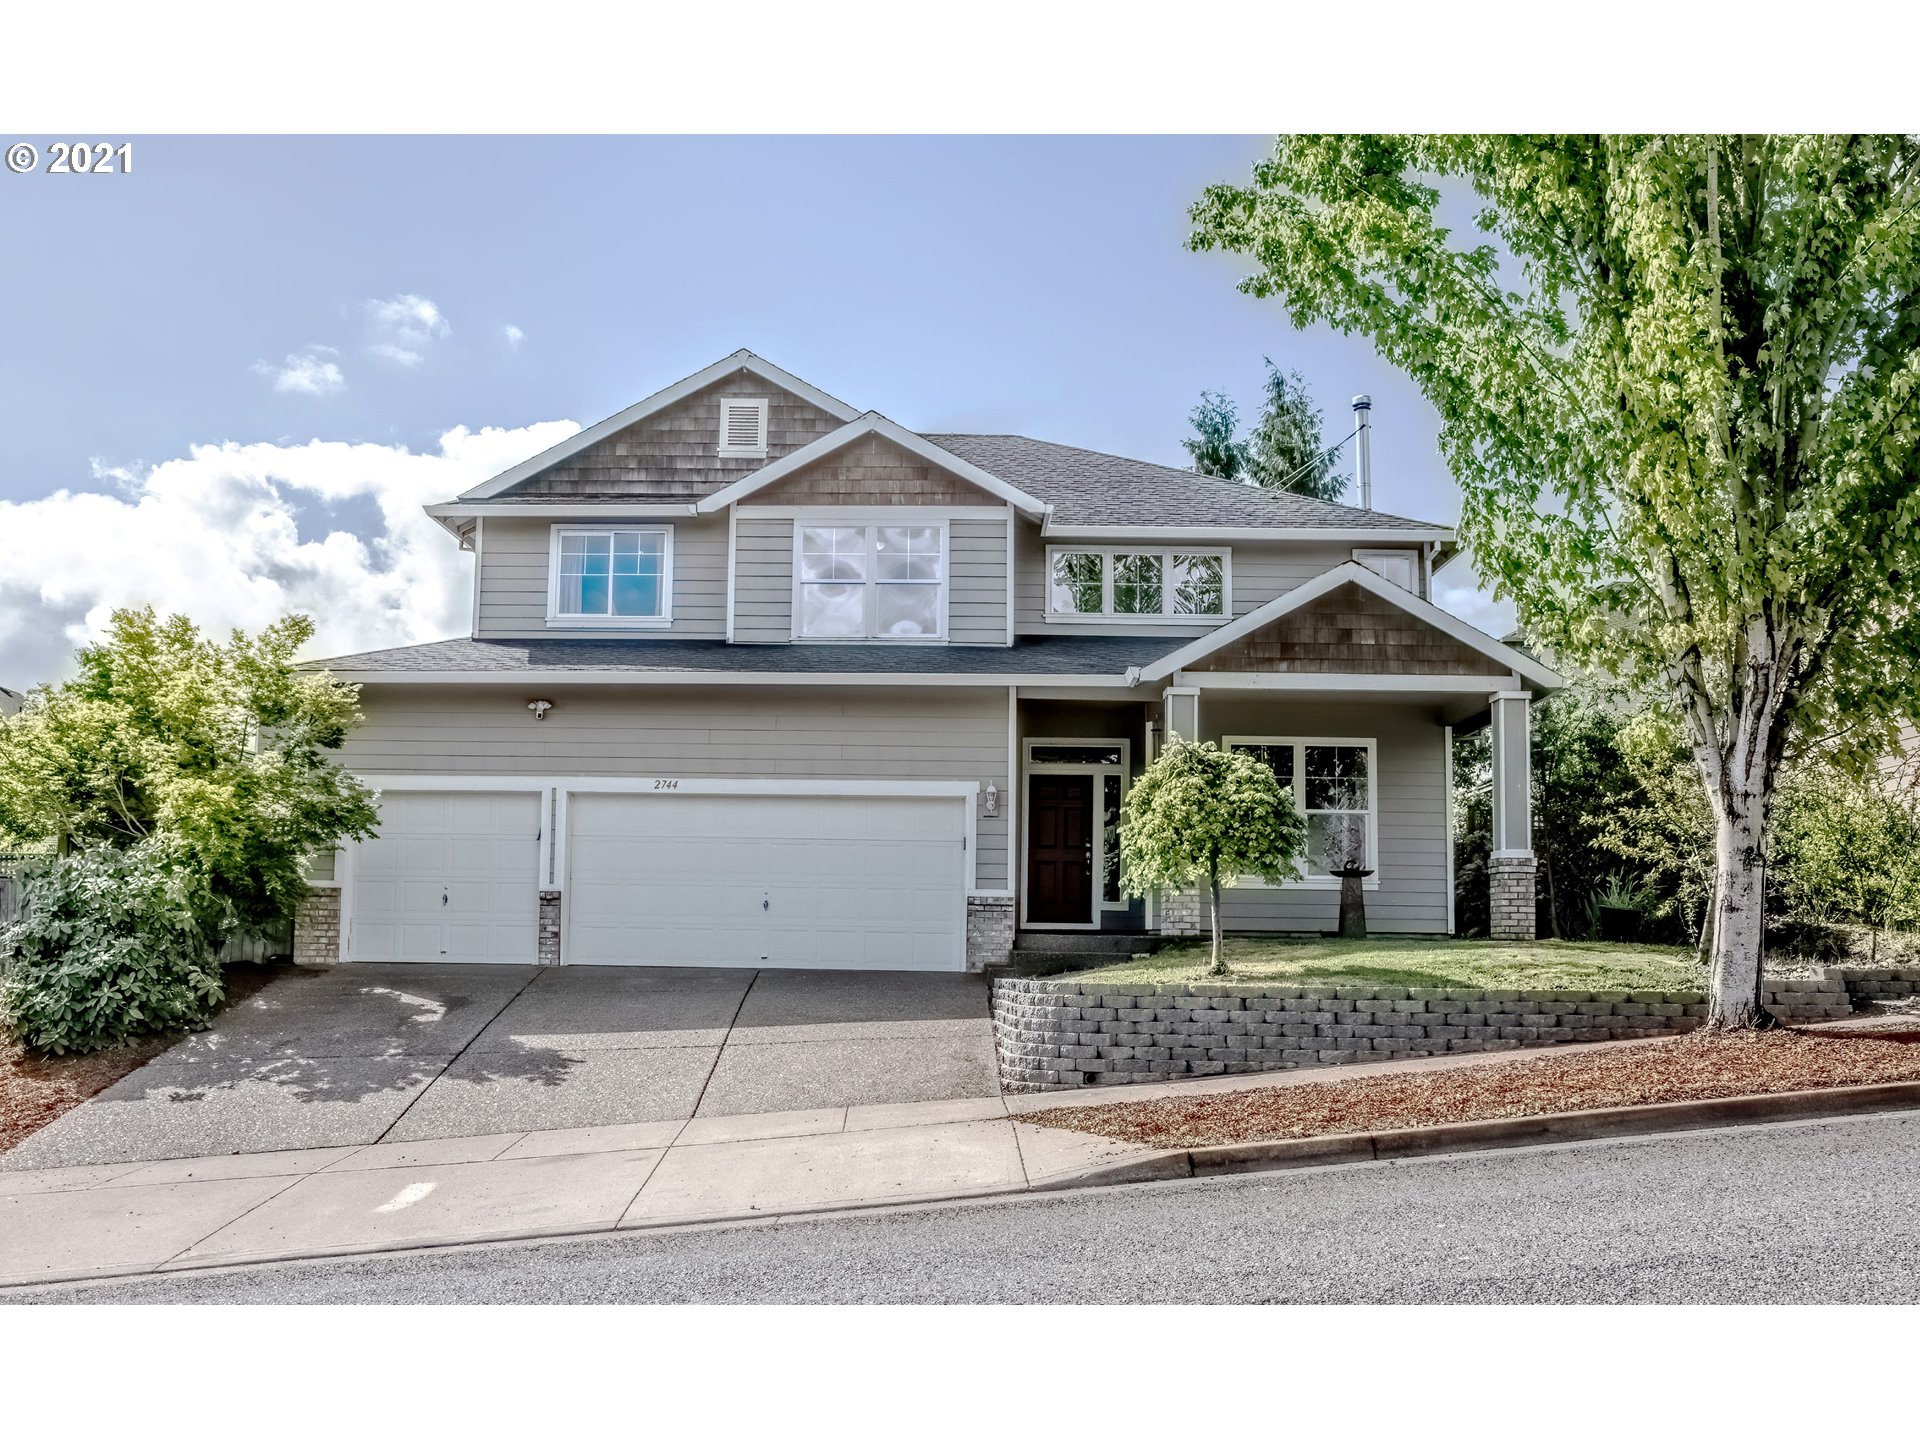 2744 NW BALD EAGLE AVE (1 of 32)